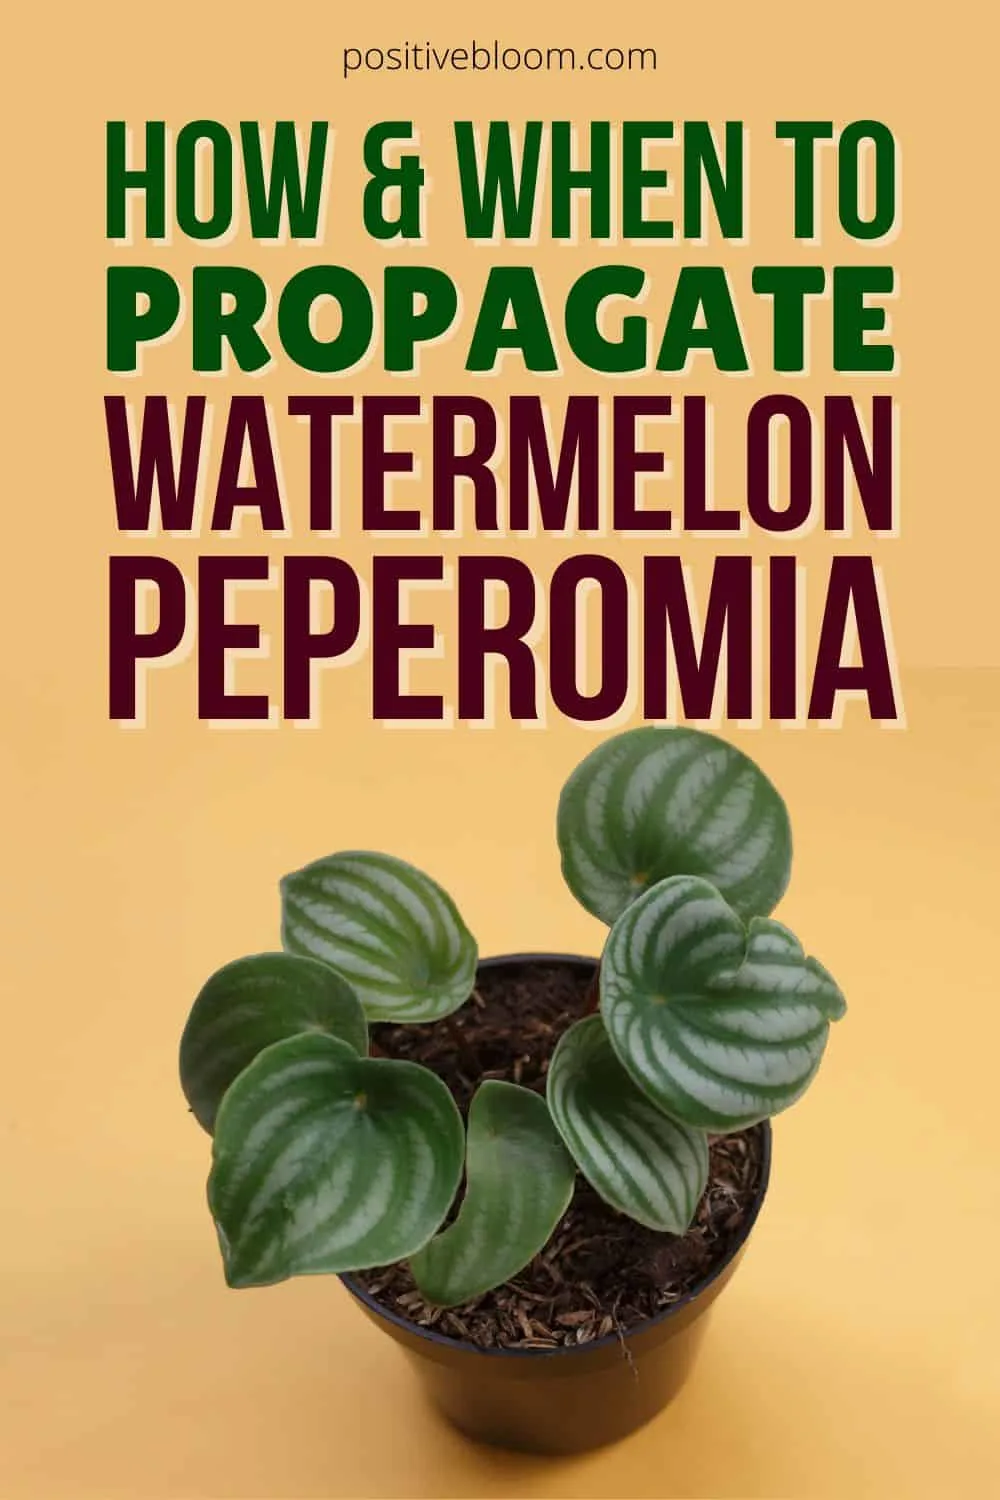 How And When To Propagate Watermelon Peperomia Pinterest